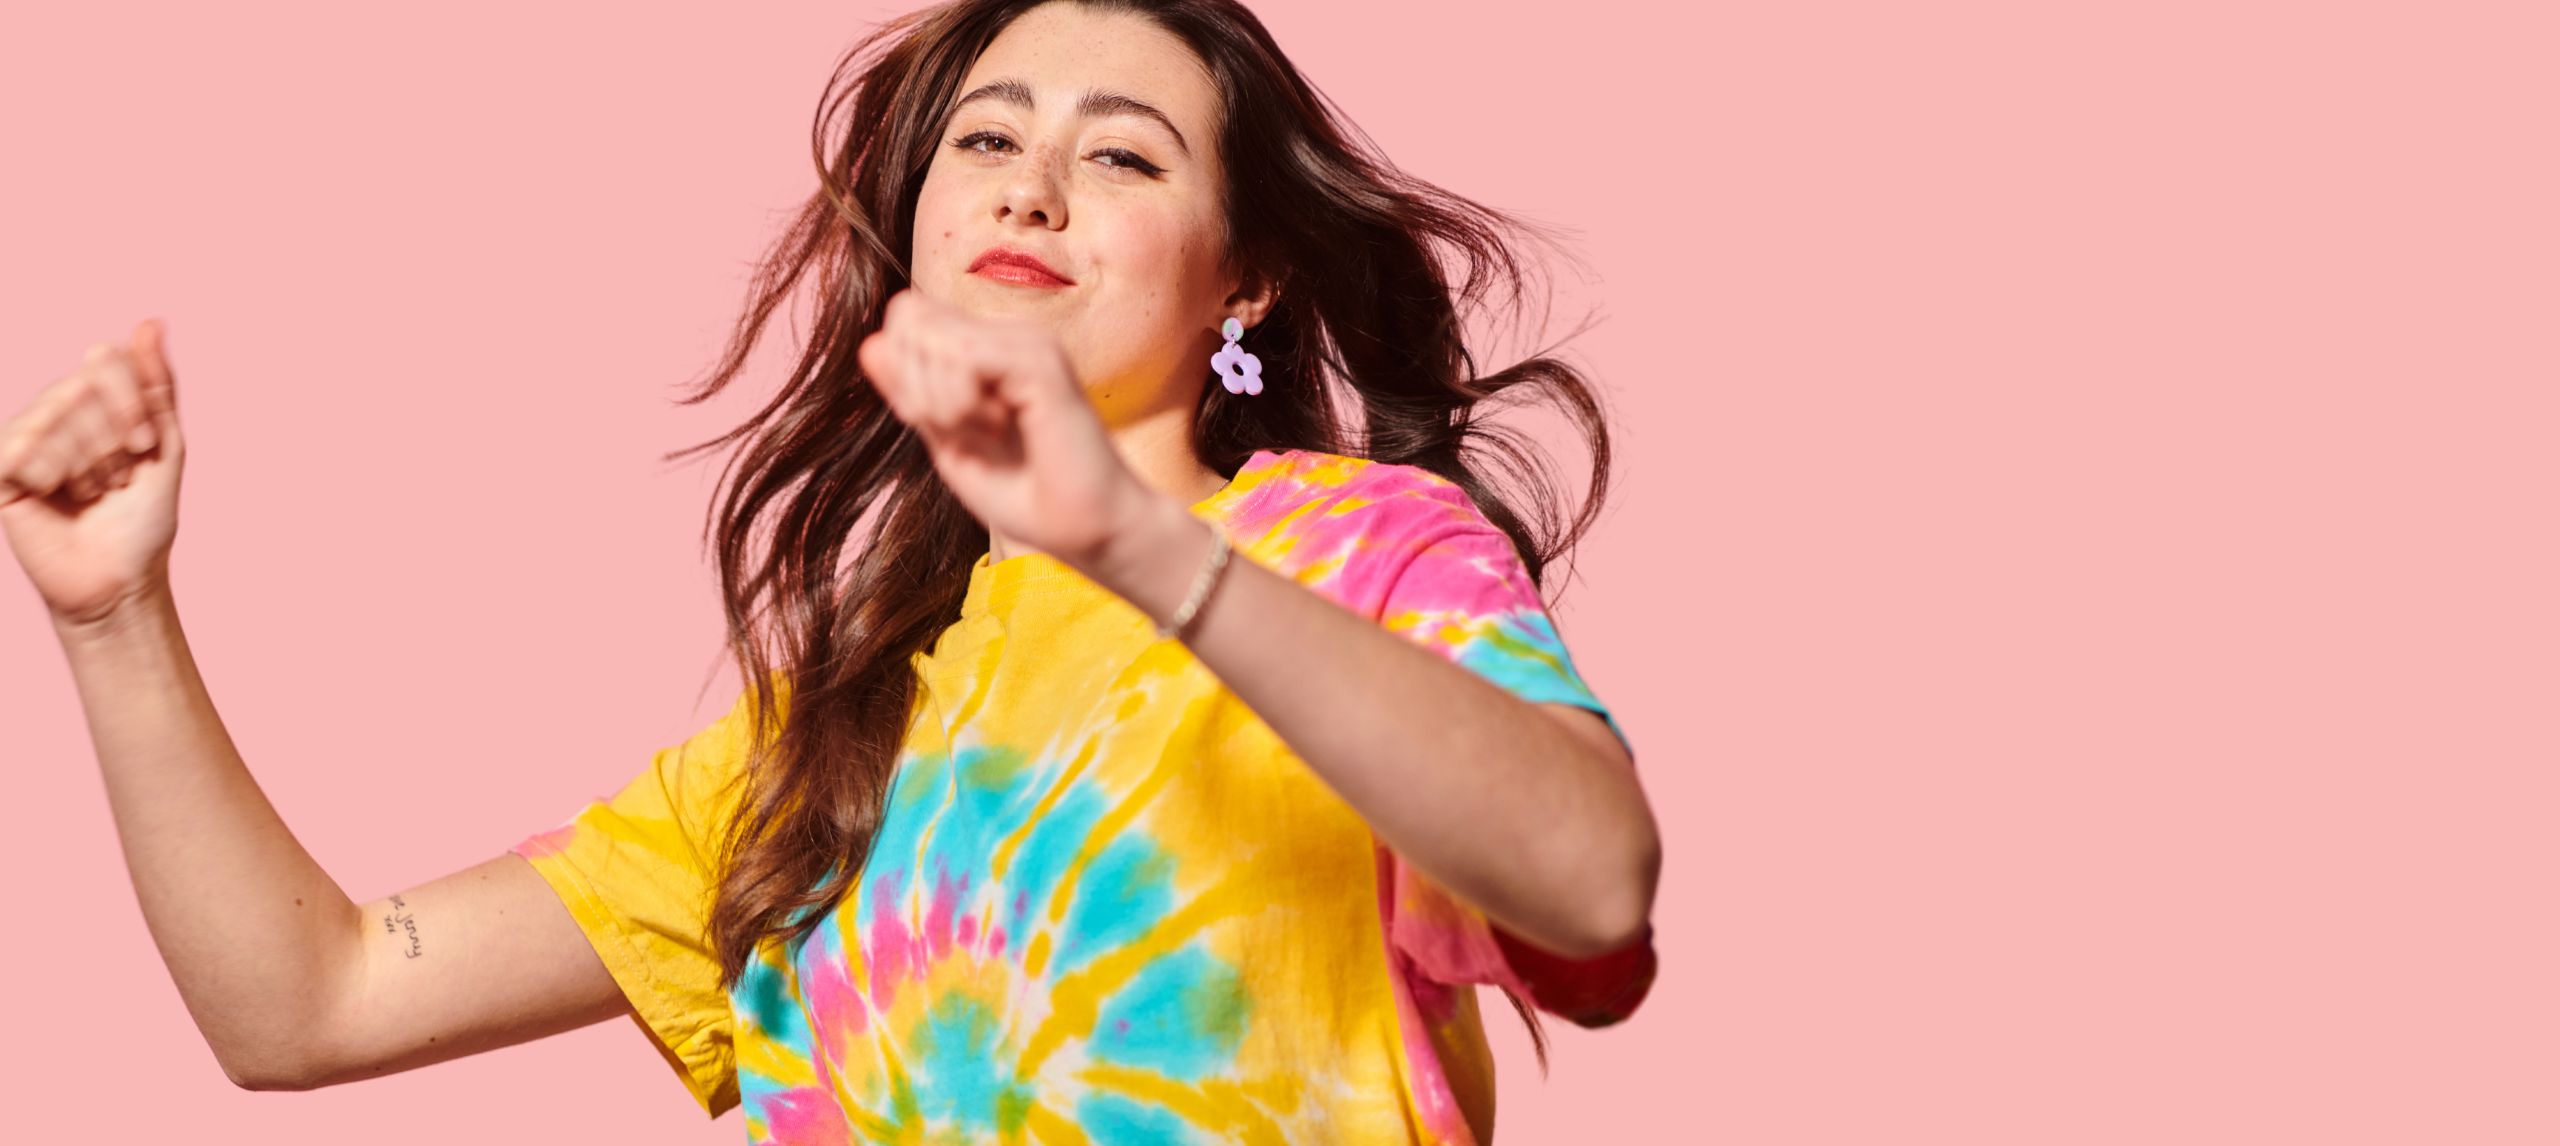 young girl dancing in tie dye shirt with pink background